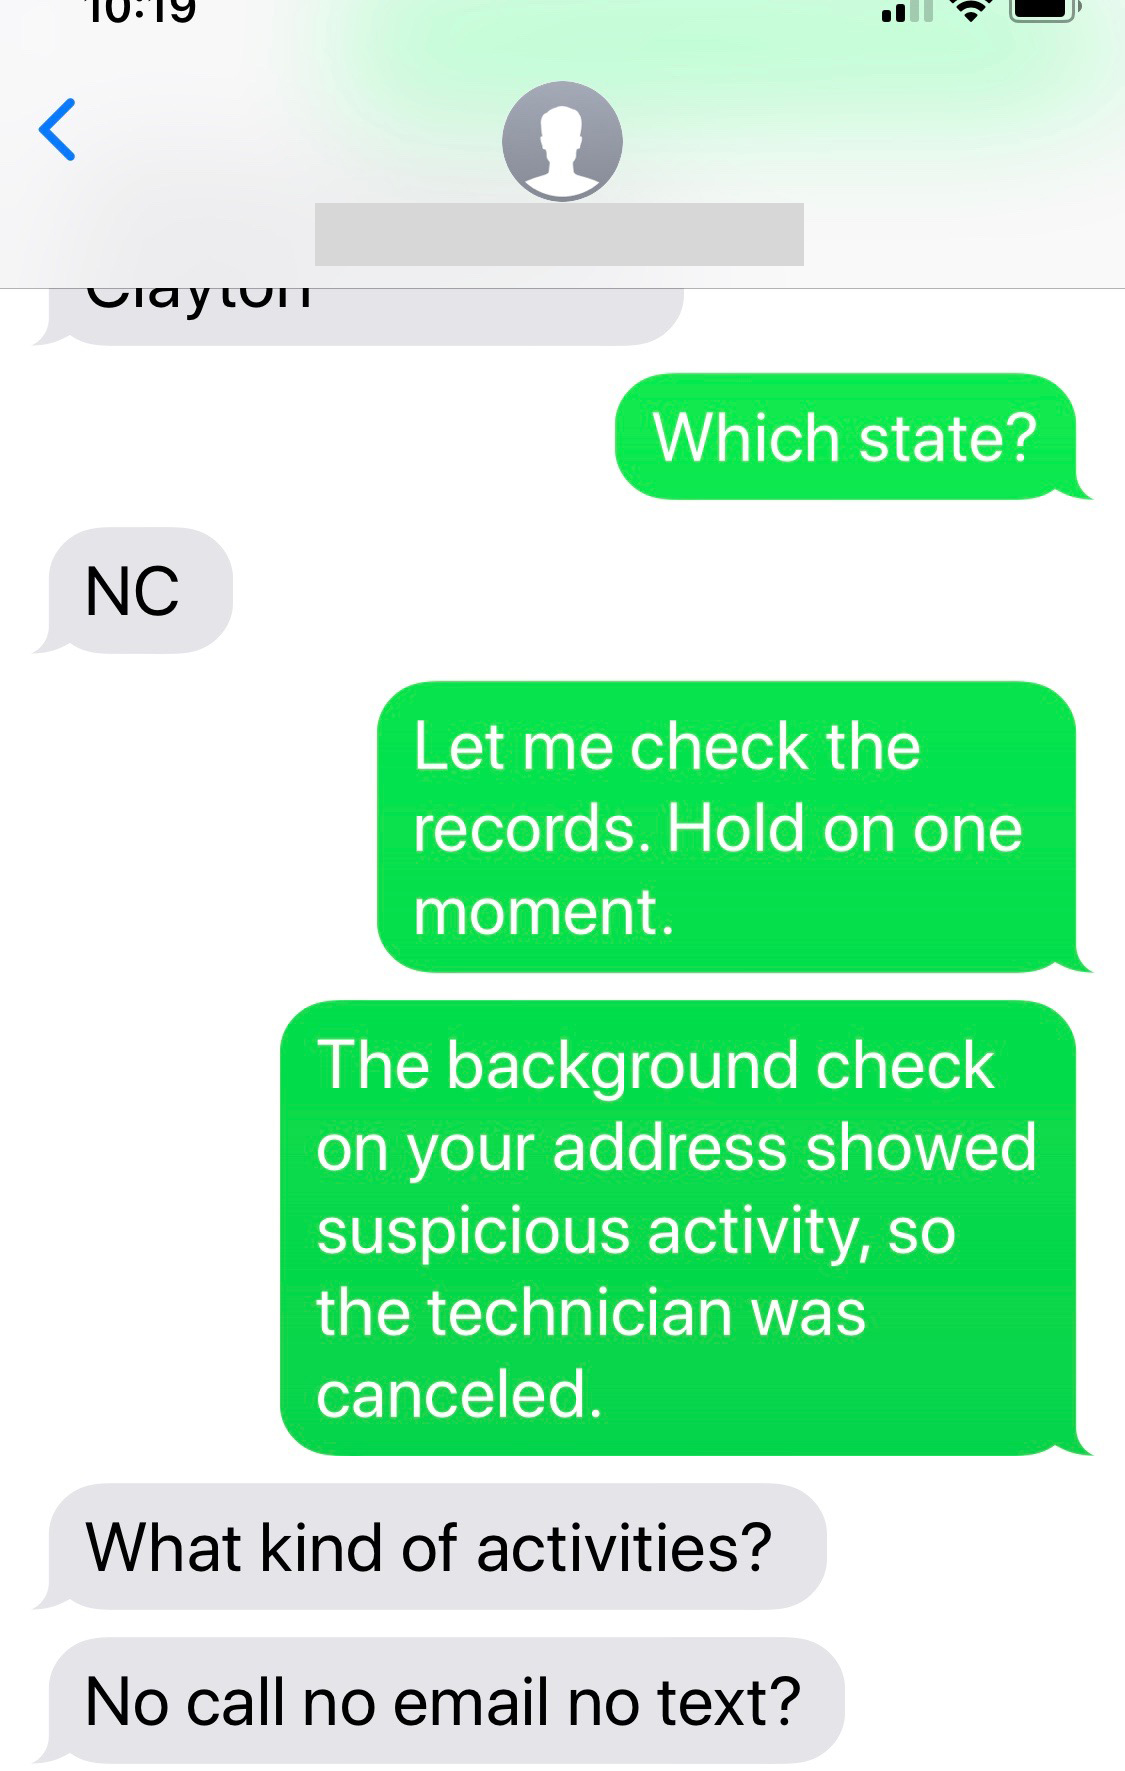 wrong number text - number - Iu.Iy Vlay in Which state? Nc Let me check the records. Hold on one moment. The background check on your address showed suspicious activity, so the technician was canceled. What kind of activities? No call no email no text?